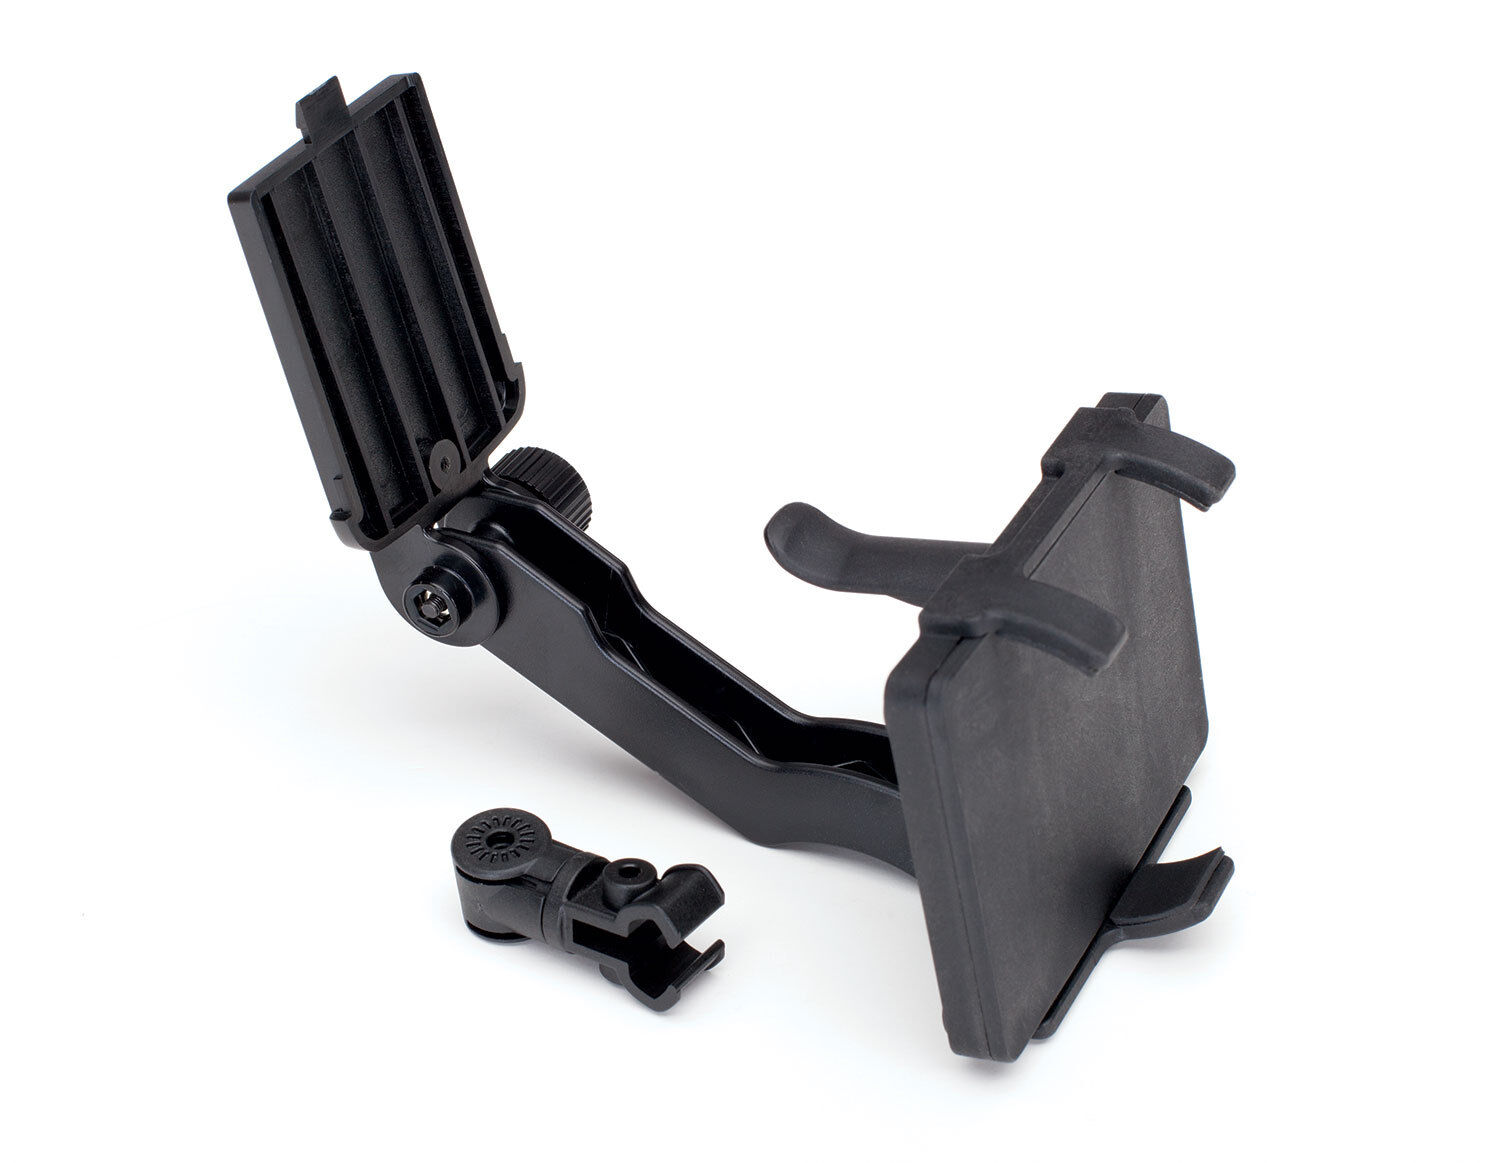 Traxxas 6532 Transmitter Phone Mount, Fits TQI and Aton